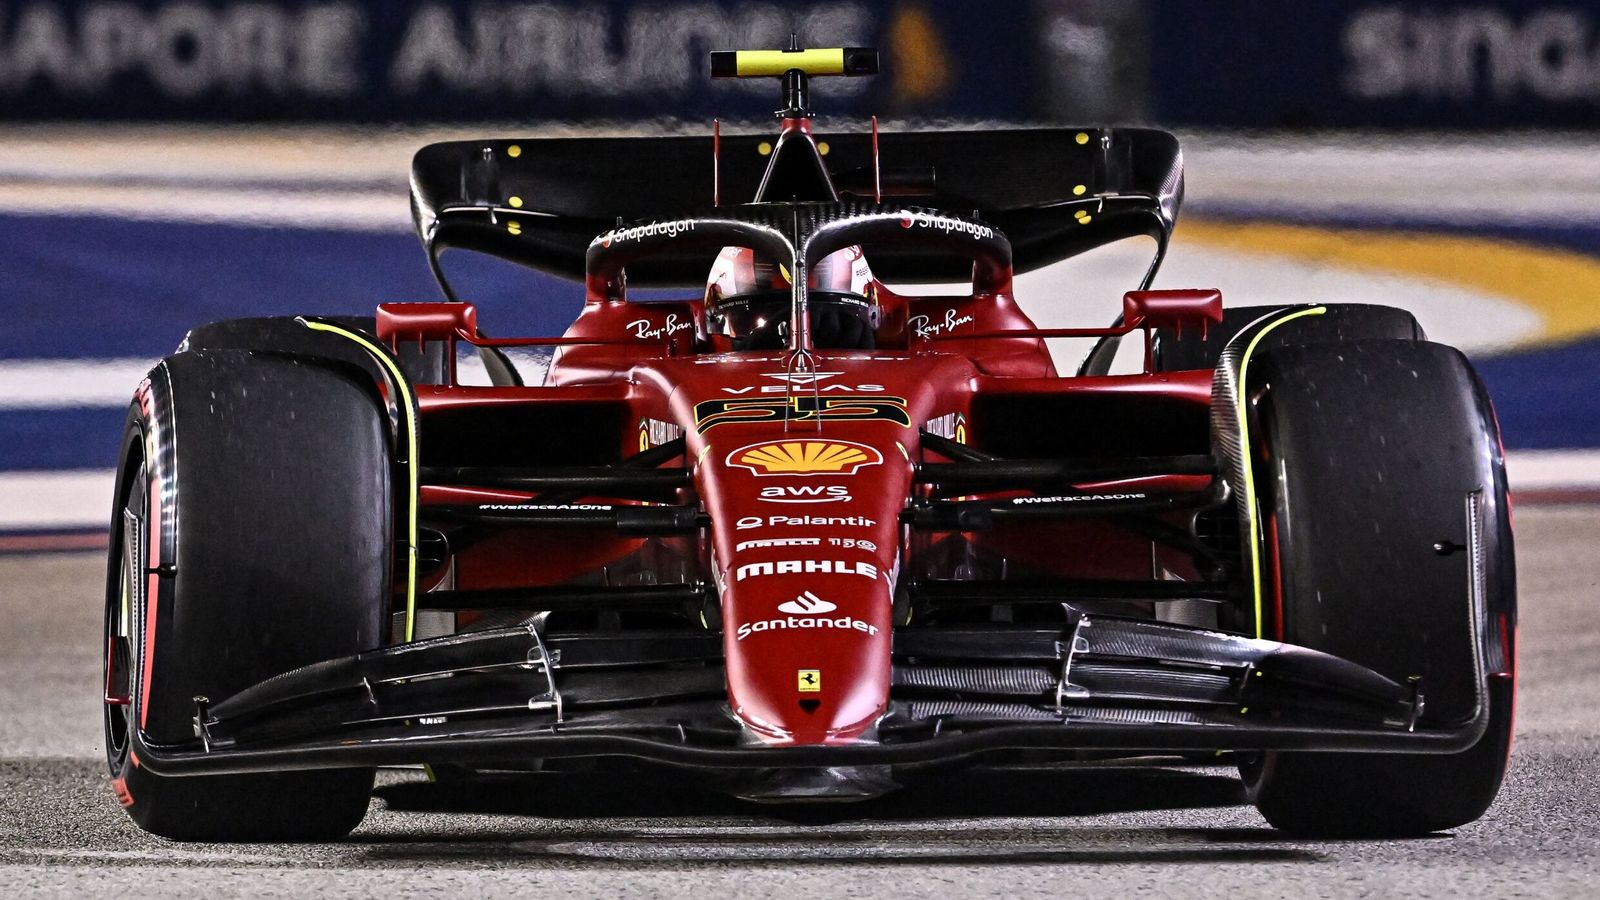 Singapore GP: Carlos Sainz leads Ferrari one-two from Charles Leclerc in Practice Two